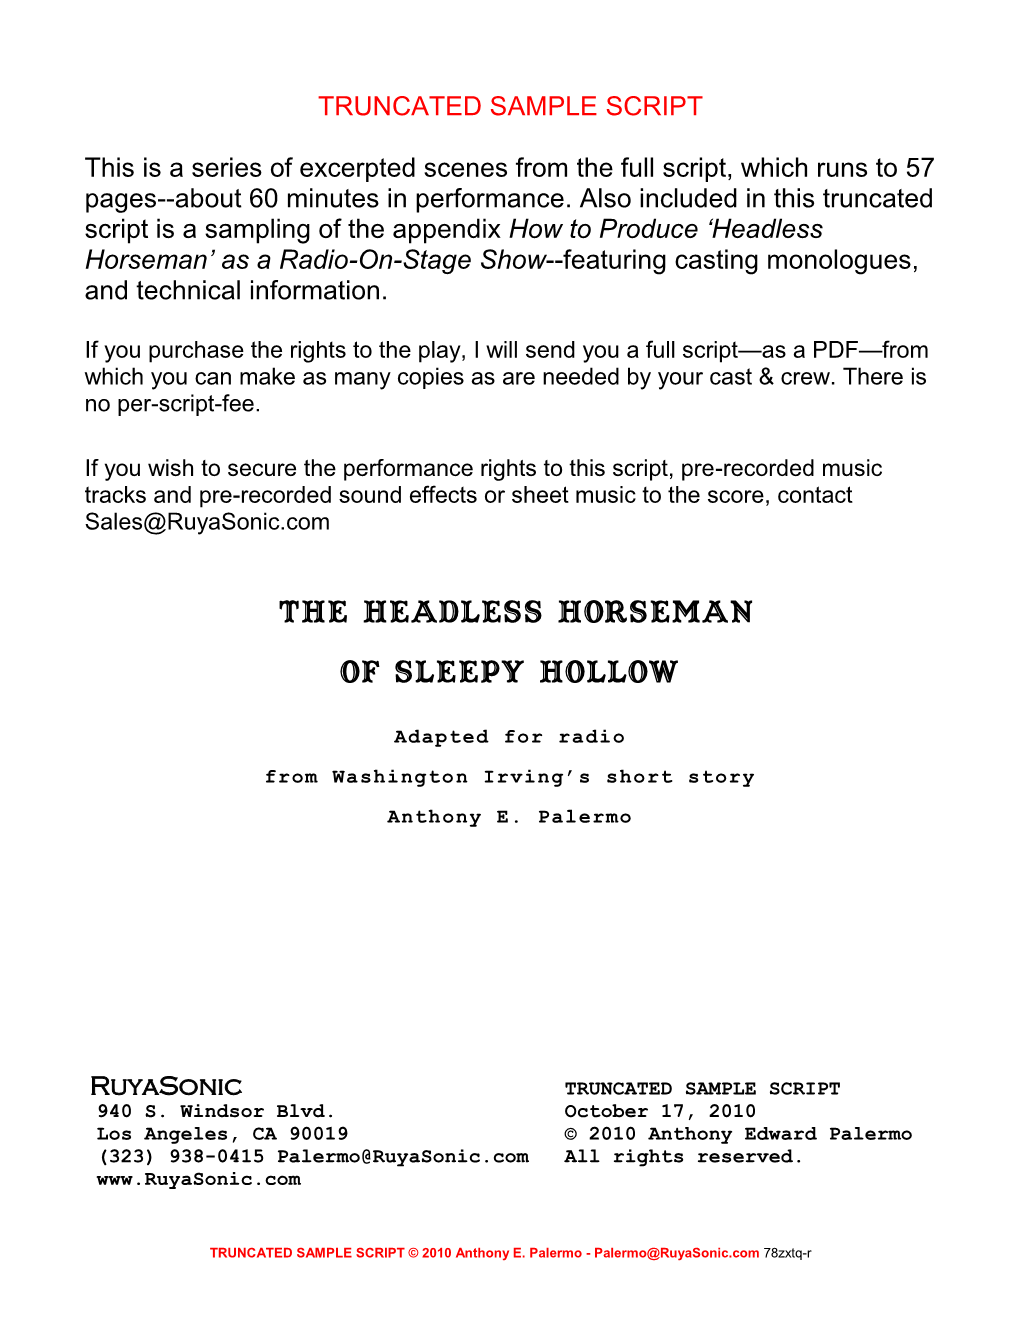 Headless Horseman’ As a Radio-On-Stage Show--Featuring Casting Monologues, and Technical Information